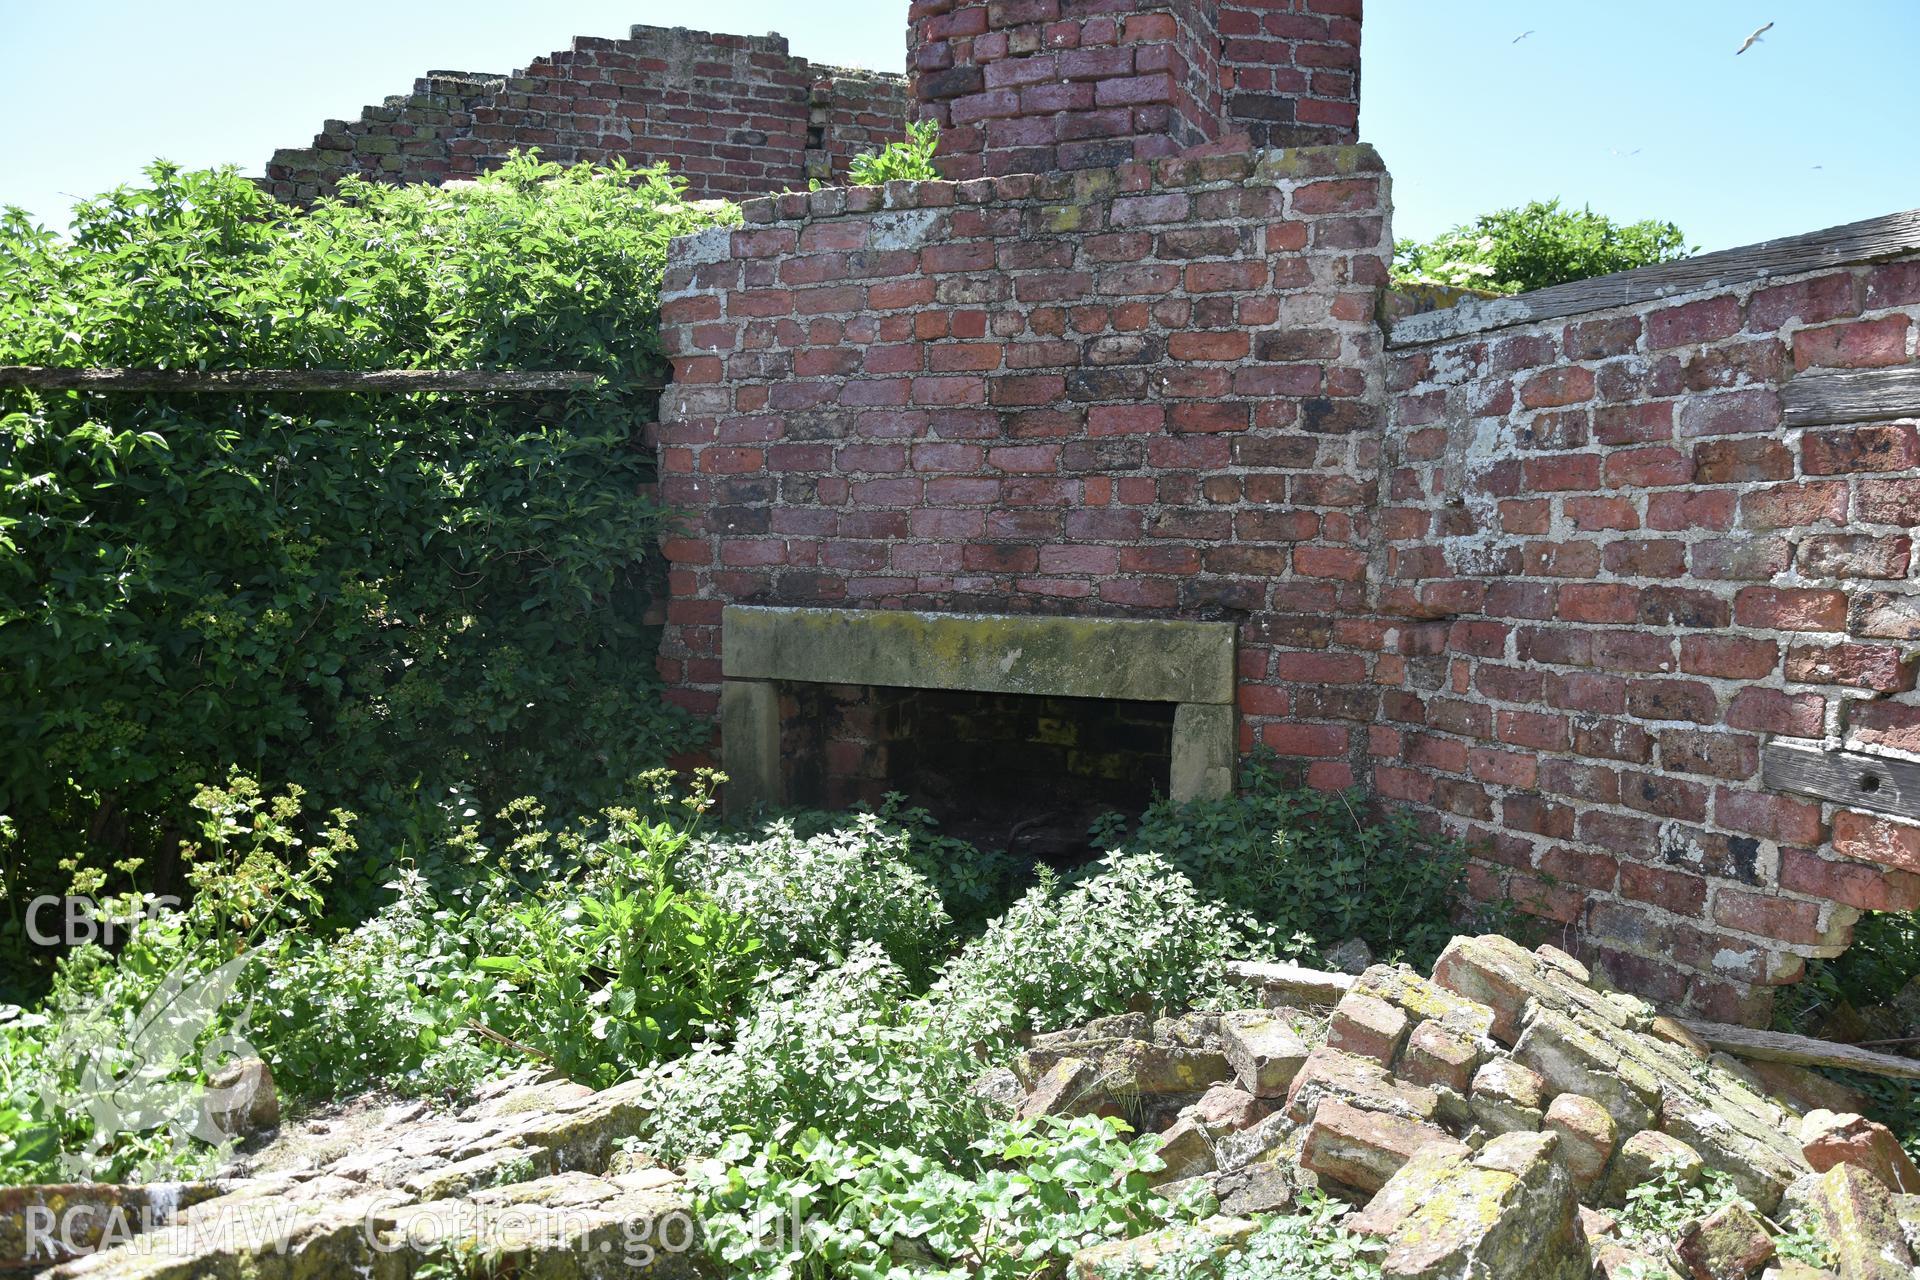 Investigator's photographic survey of the Telegraph Station on Puffin Island or Ynys Seiriol for the CHERISH Project. Interior view of ruin. ? Crown: CHERISH PROJECT 2018. Produced with EU funds through the Ireland Wales Co-operation Programme 2014-2020. All material made freely available through the Open Government Licence.